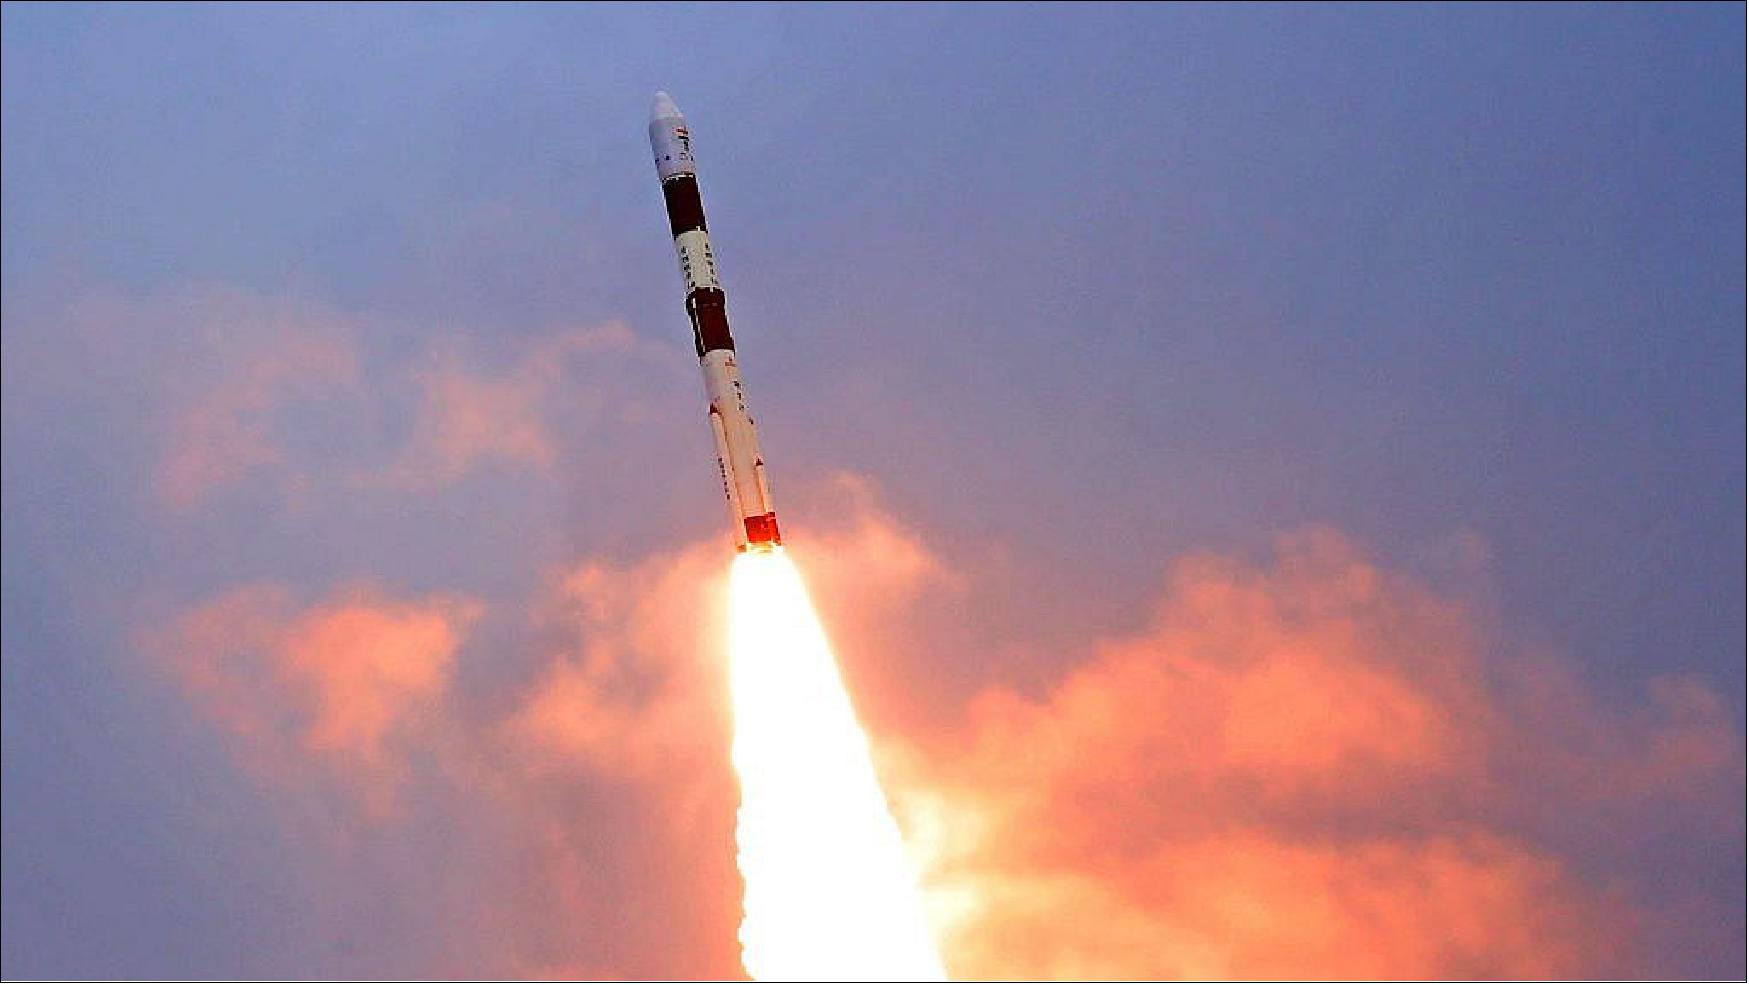 Figure 4: ISRO's PSLV C-49 takes off from Satish Dhawan Space Centre in Sriharikota on 7 November 2020 with nine customer satellites from Lithuania (1), Luxembourg (4) and USA (4) were launched under a commercial arrangement with NewSpace India Limited (NSIL). PSLV-C49 is the 2nd flight of PSLV in 'DL' configuration (with 2 solid strap-on motors). Besides being the 51st launch of PSLV, today’s launch was also the 76th launch vehicle mission from SDSC SHAR, Sriharikota (image credit: ISRO) 9)